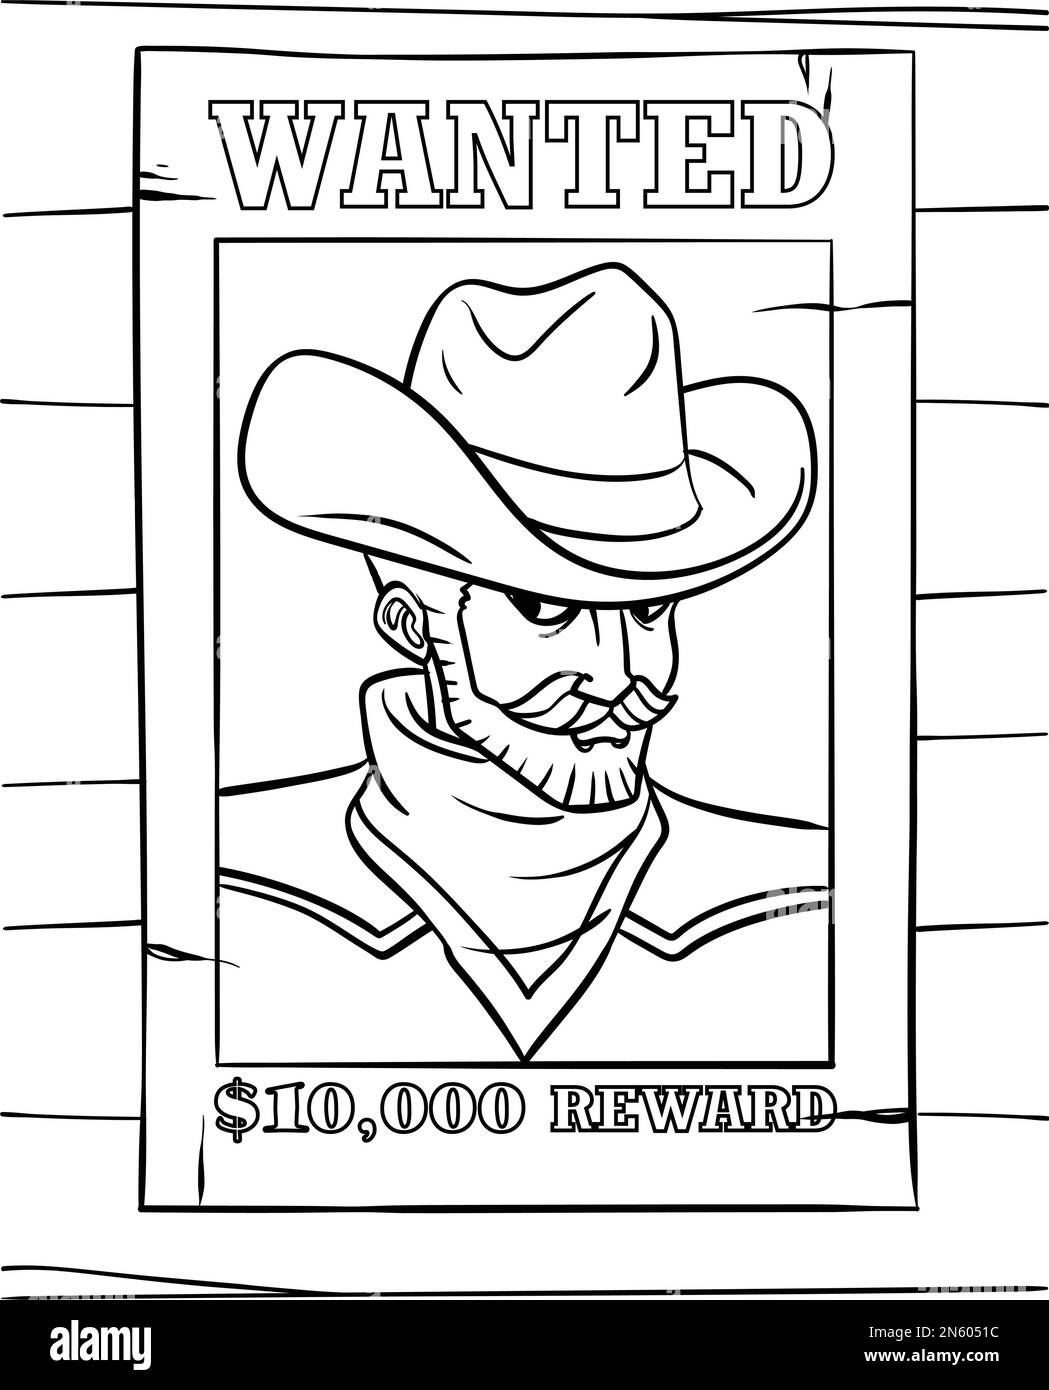 Cowboy Wanted Poster Coloring Page for Kids Stock Vector